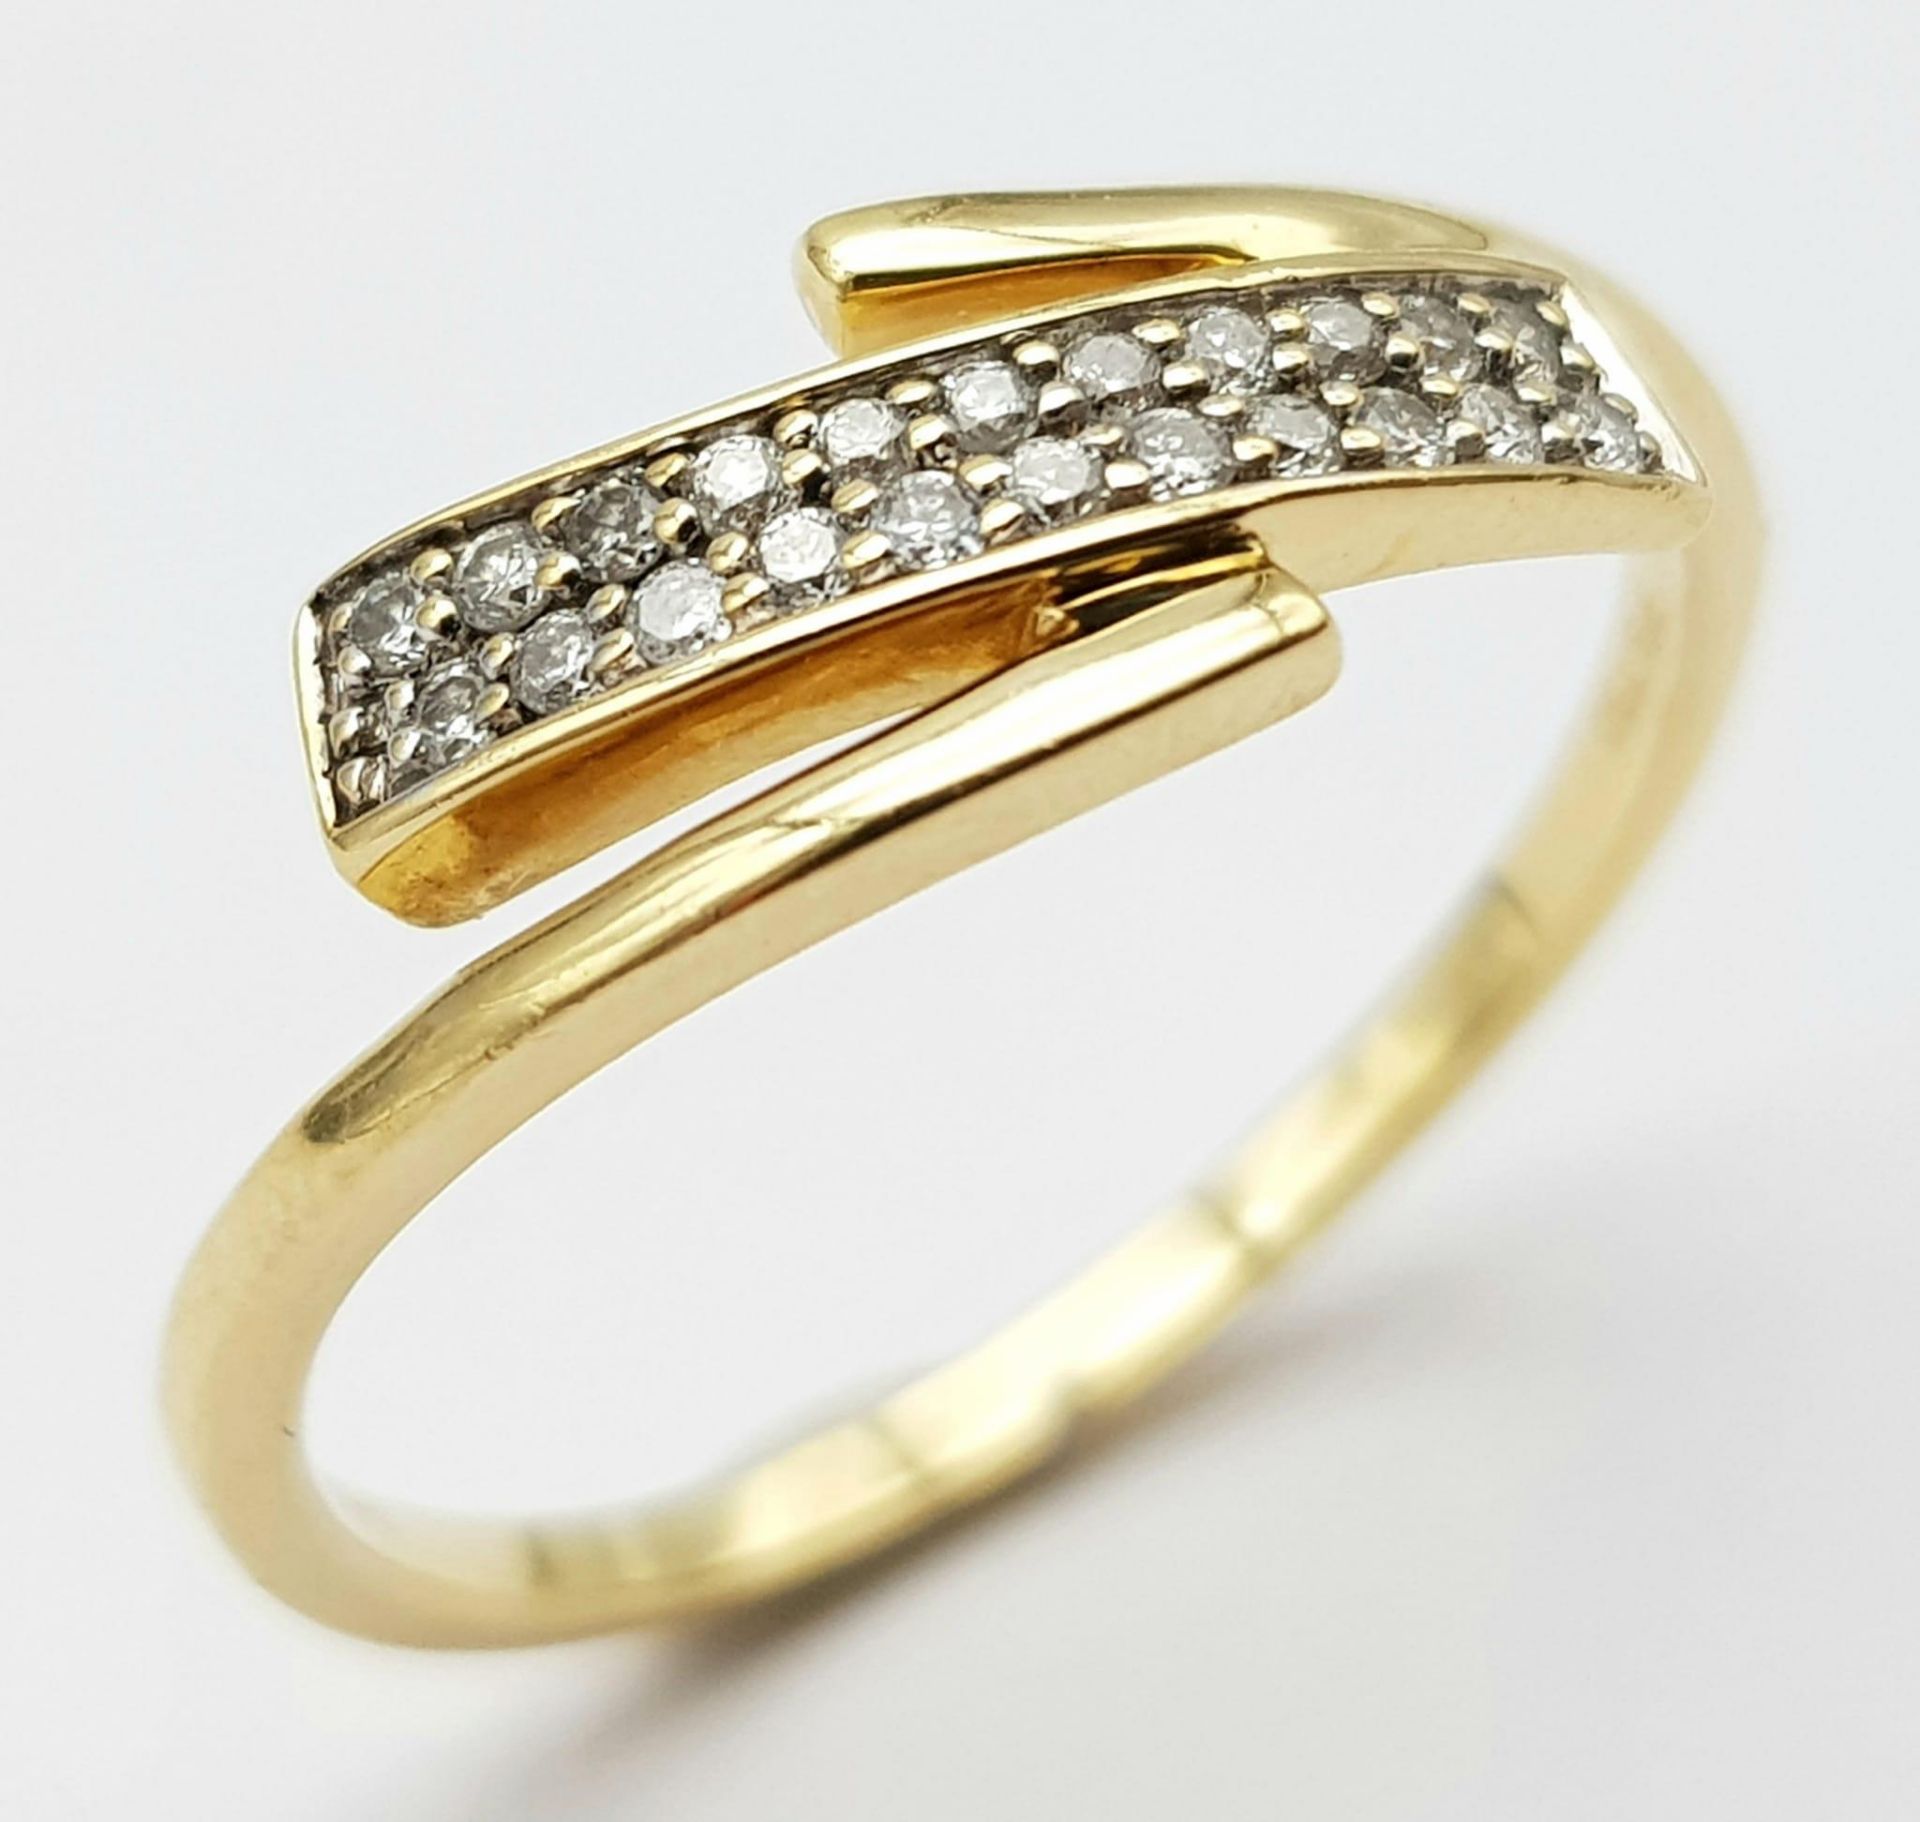 An 18K Yellow Gold Diamond 2 Row Crossover Ring. Size N, 2.2g total weight. Ref: 8461